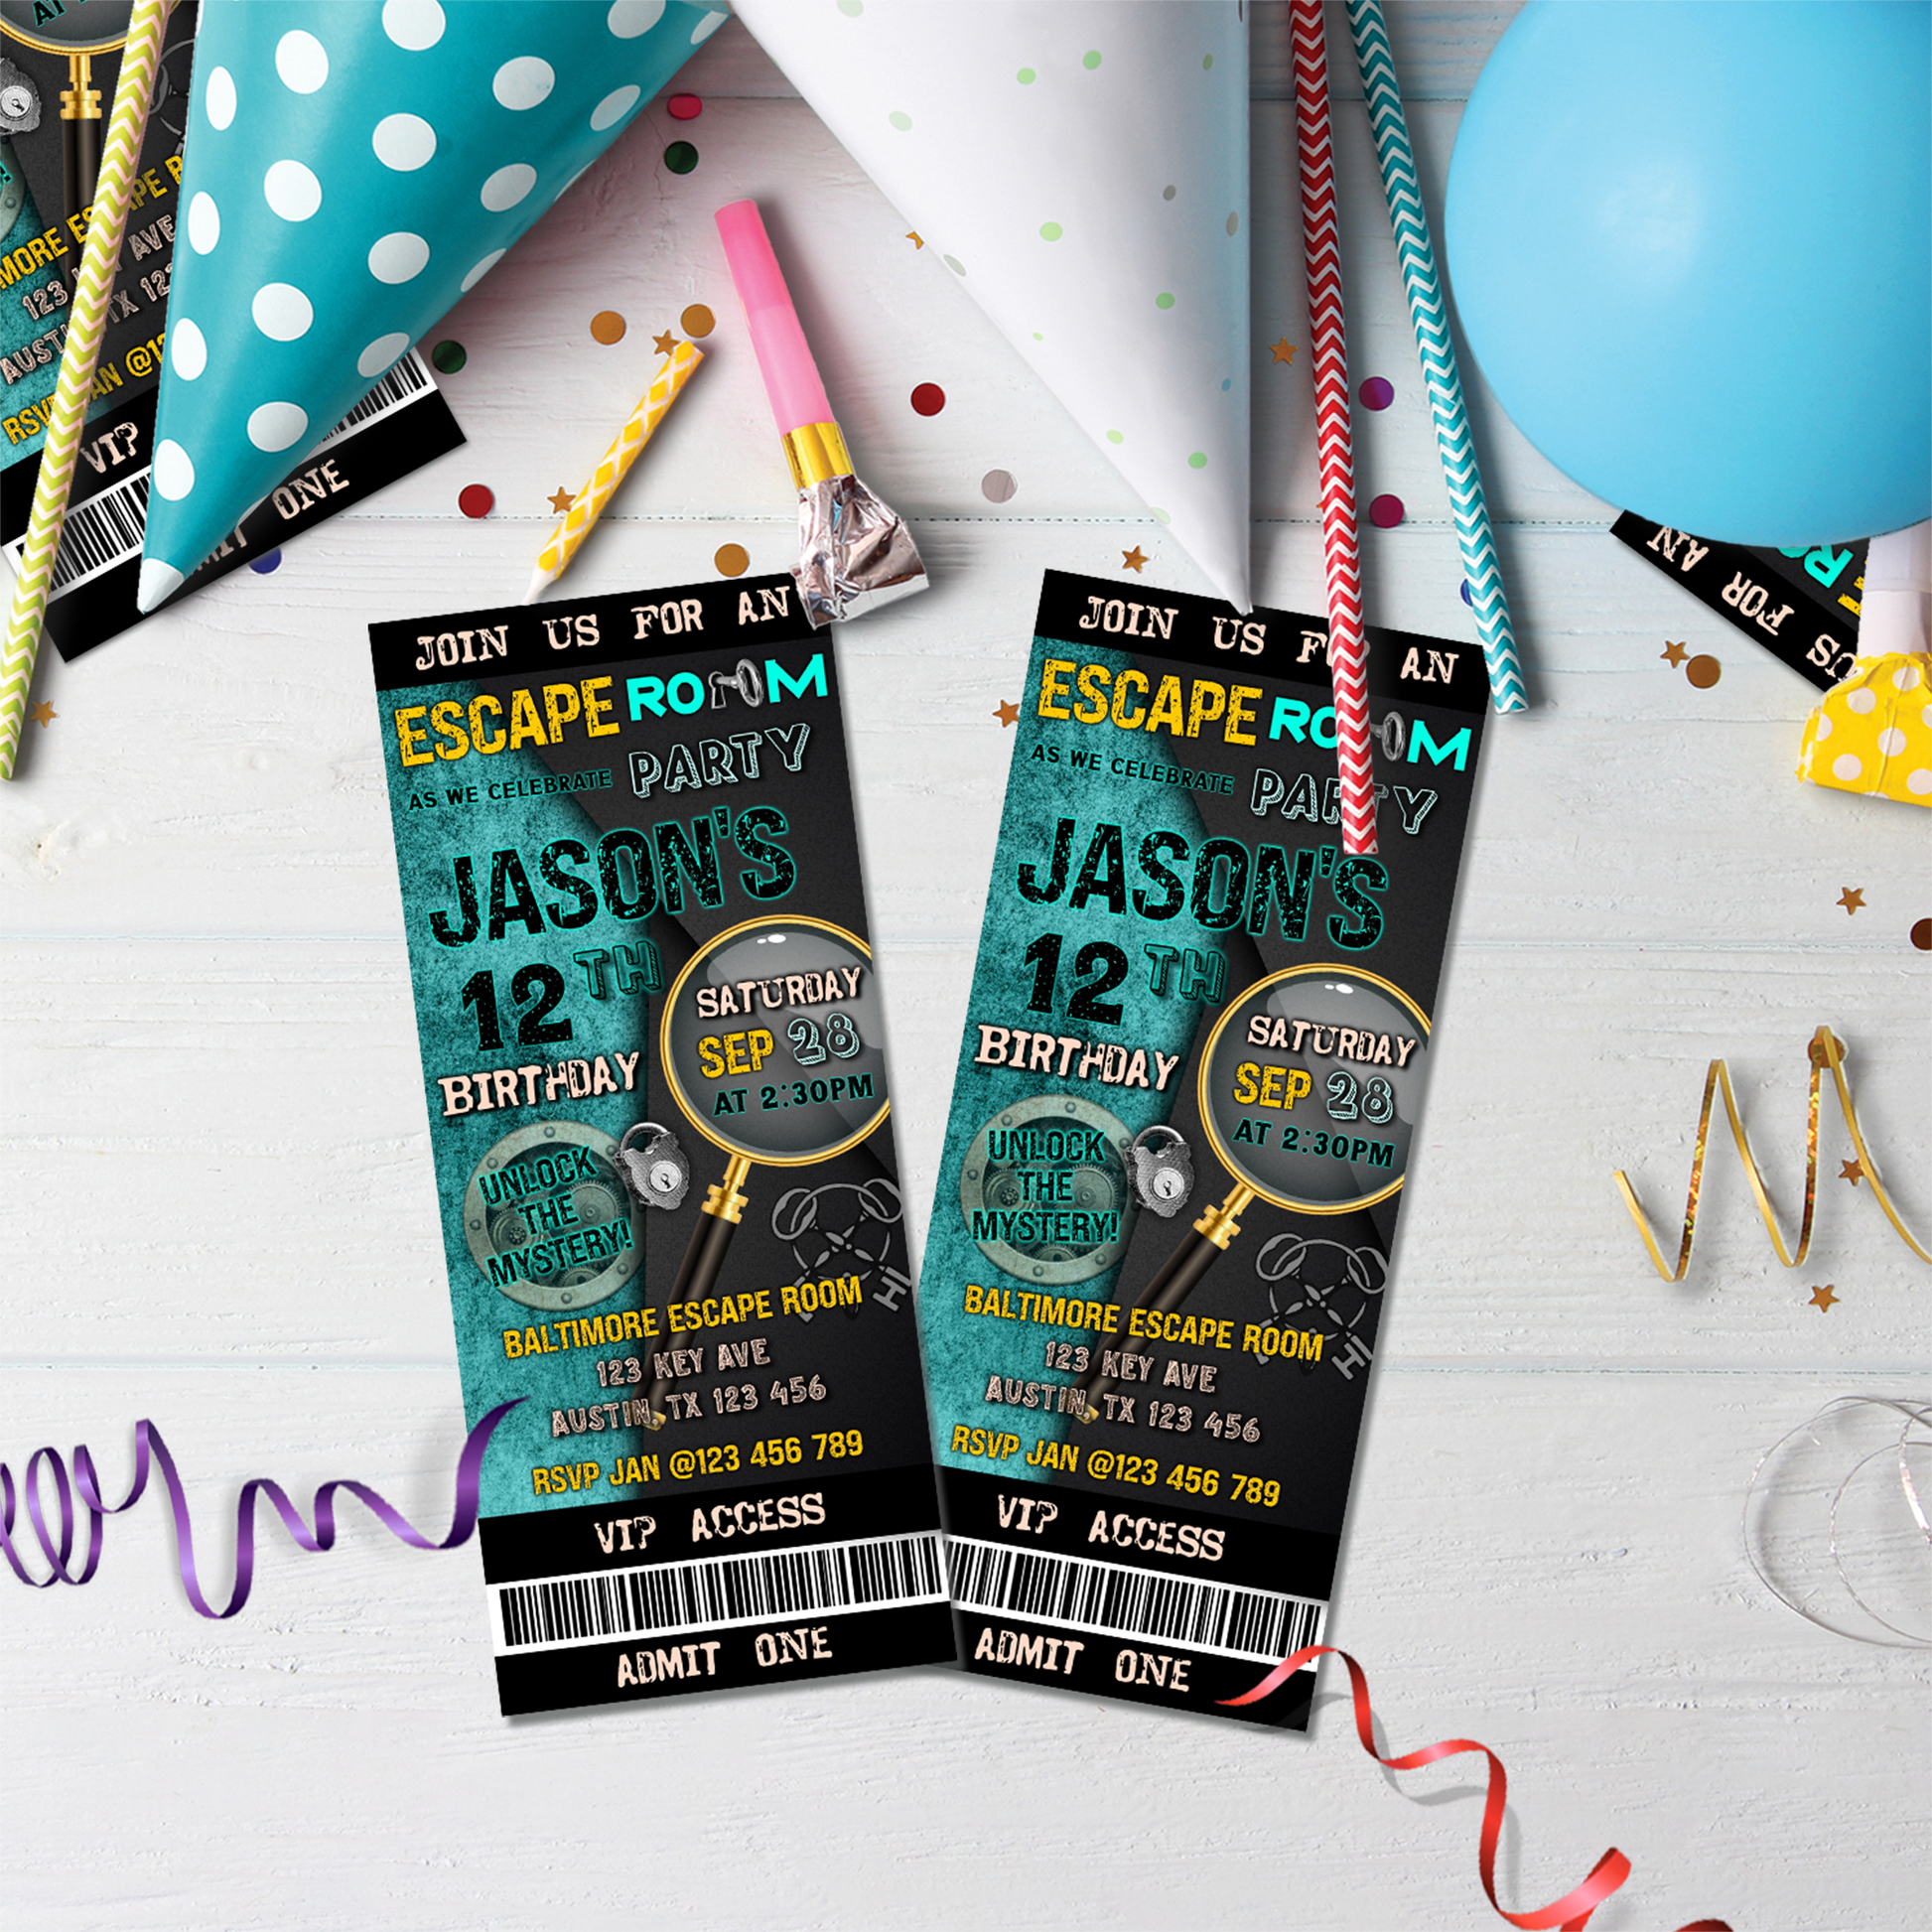 Personalized birthday ticket invitations with an Escape Room theme